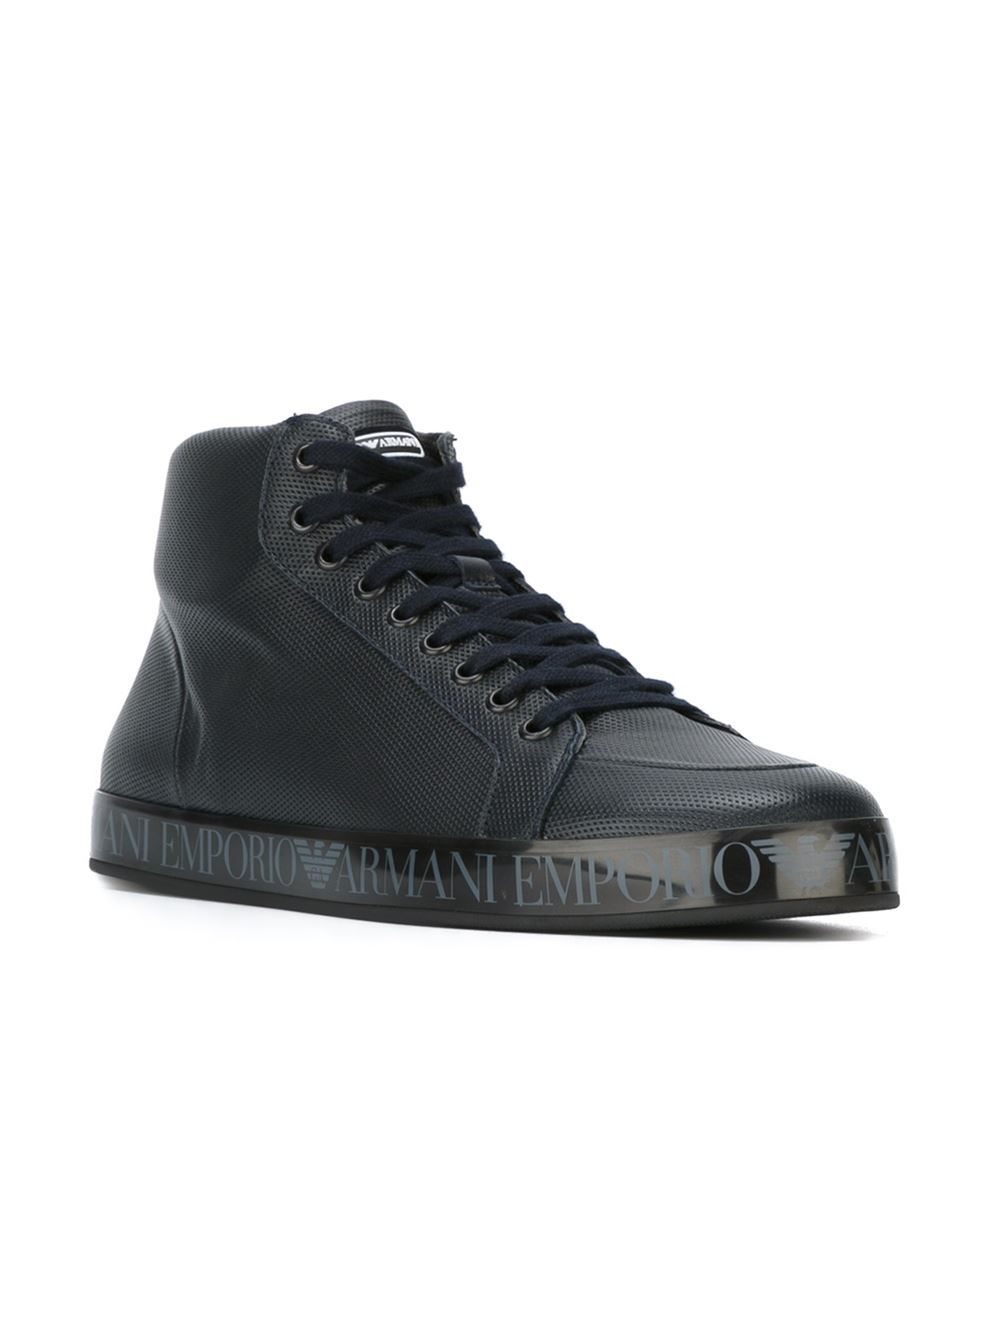 Emporio Armani Leather and Sheepskin High-Top Sneakers in Blue for Men -  Lyst